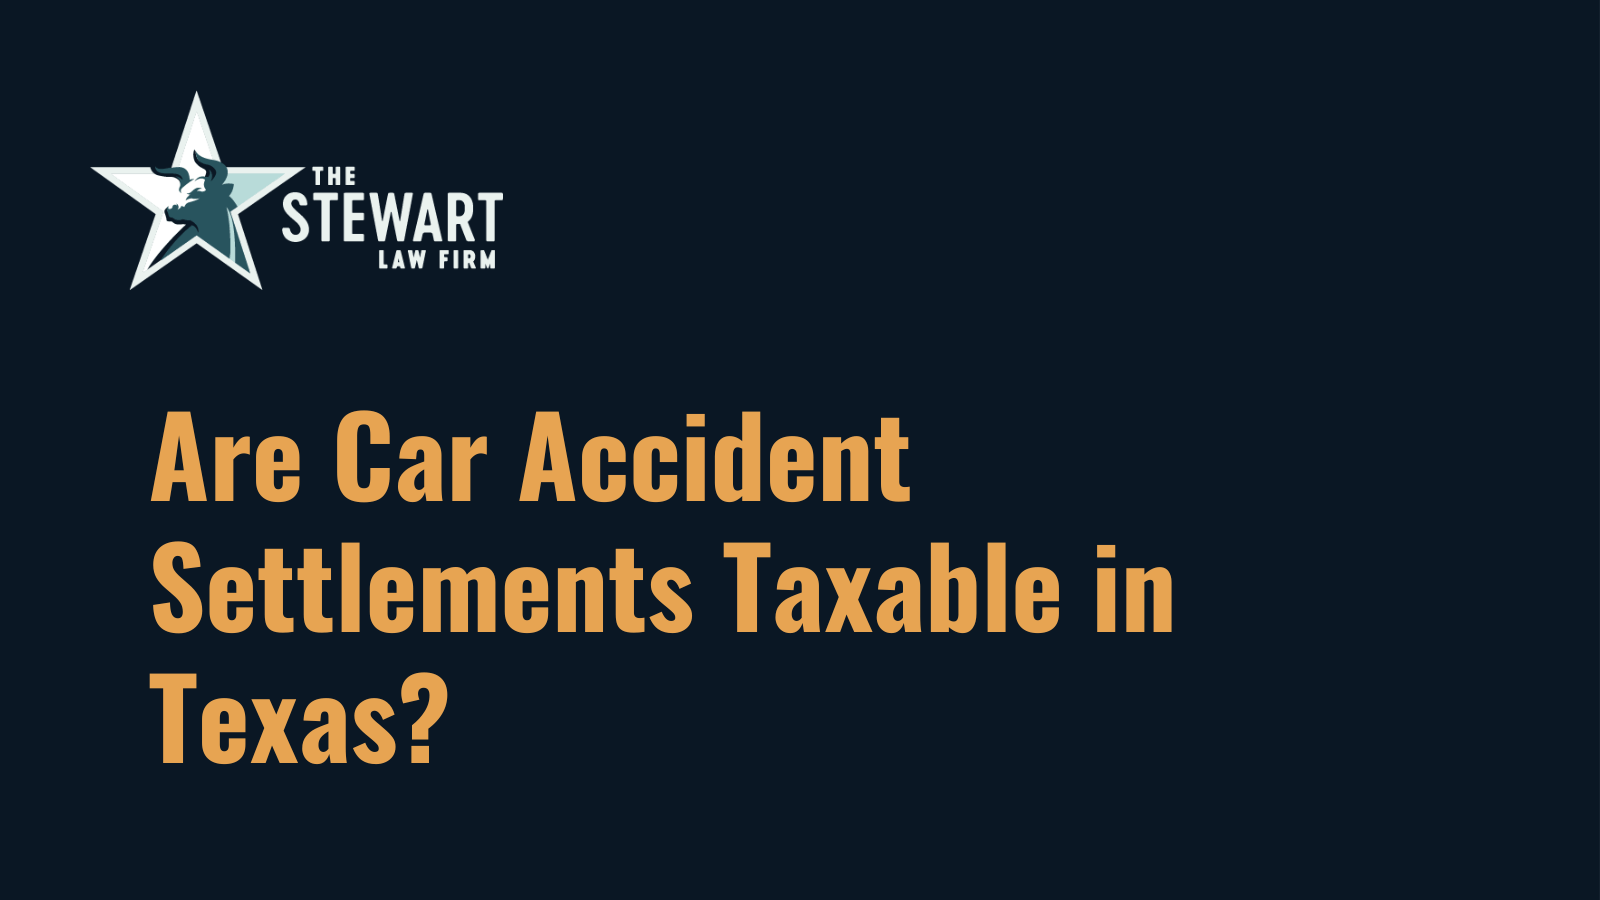 Are Car Accident Settlements Taxable in Texas - the stewart law firm - austin texas personal injury lawyer